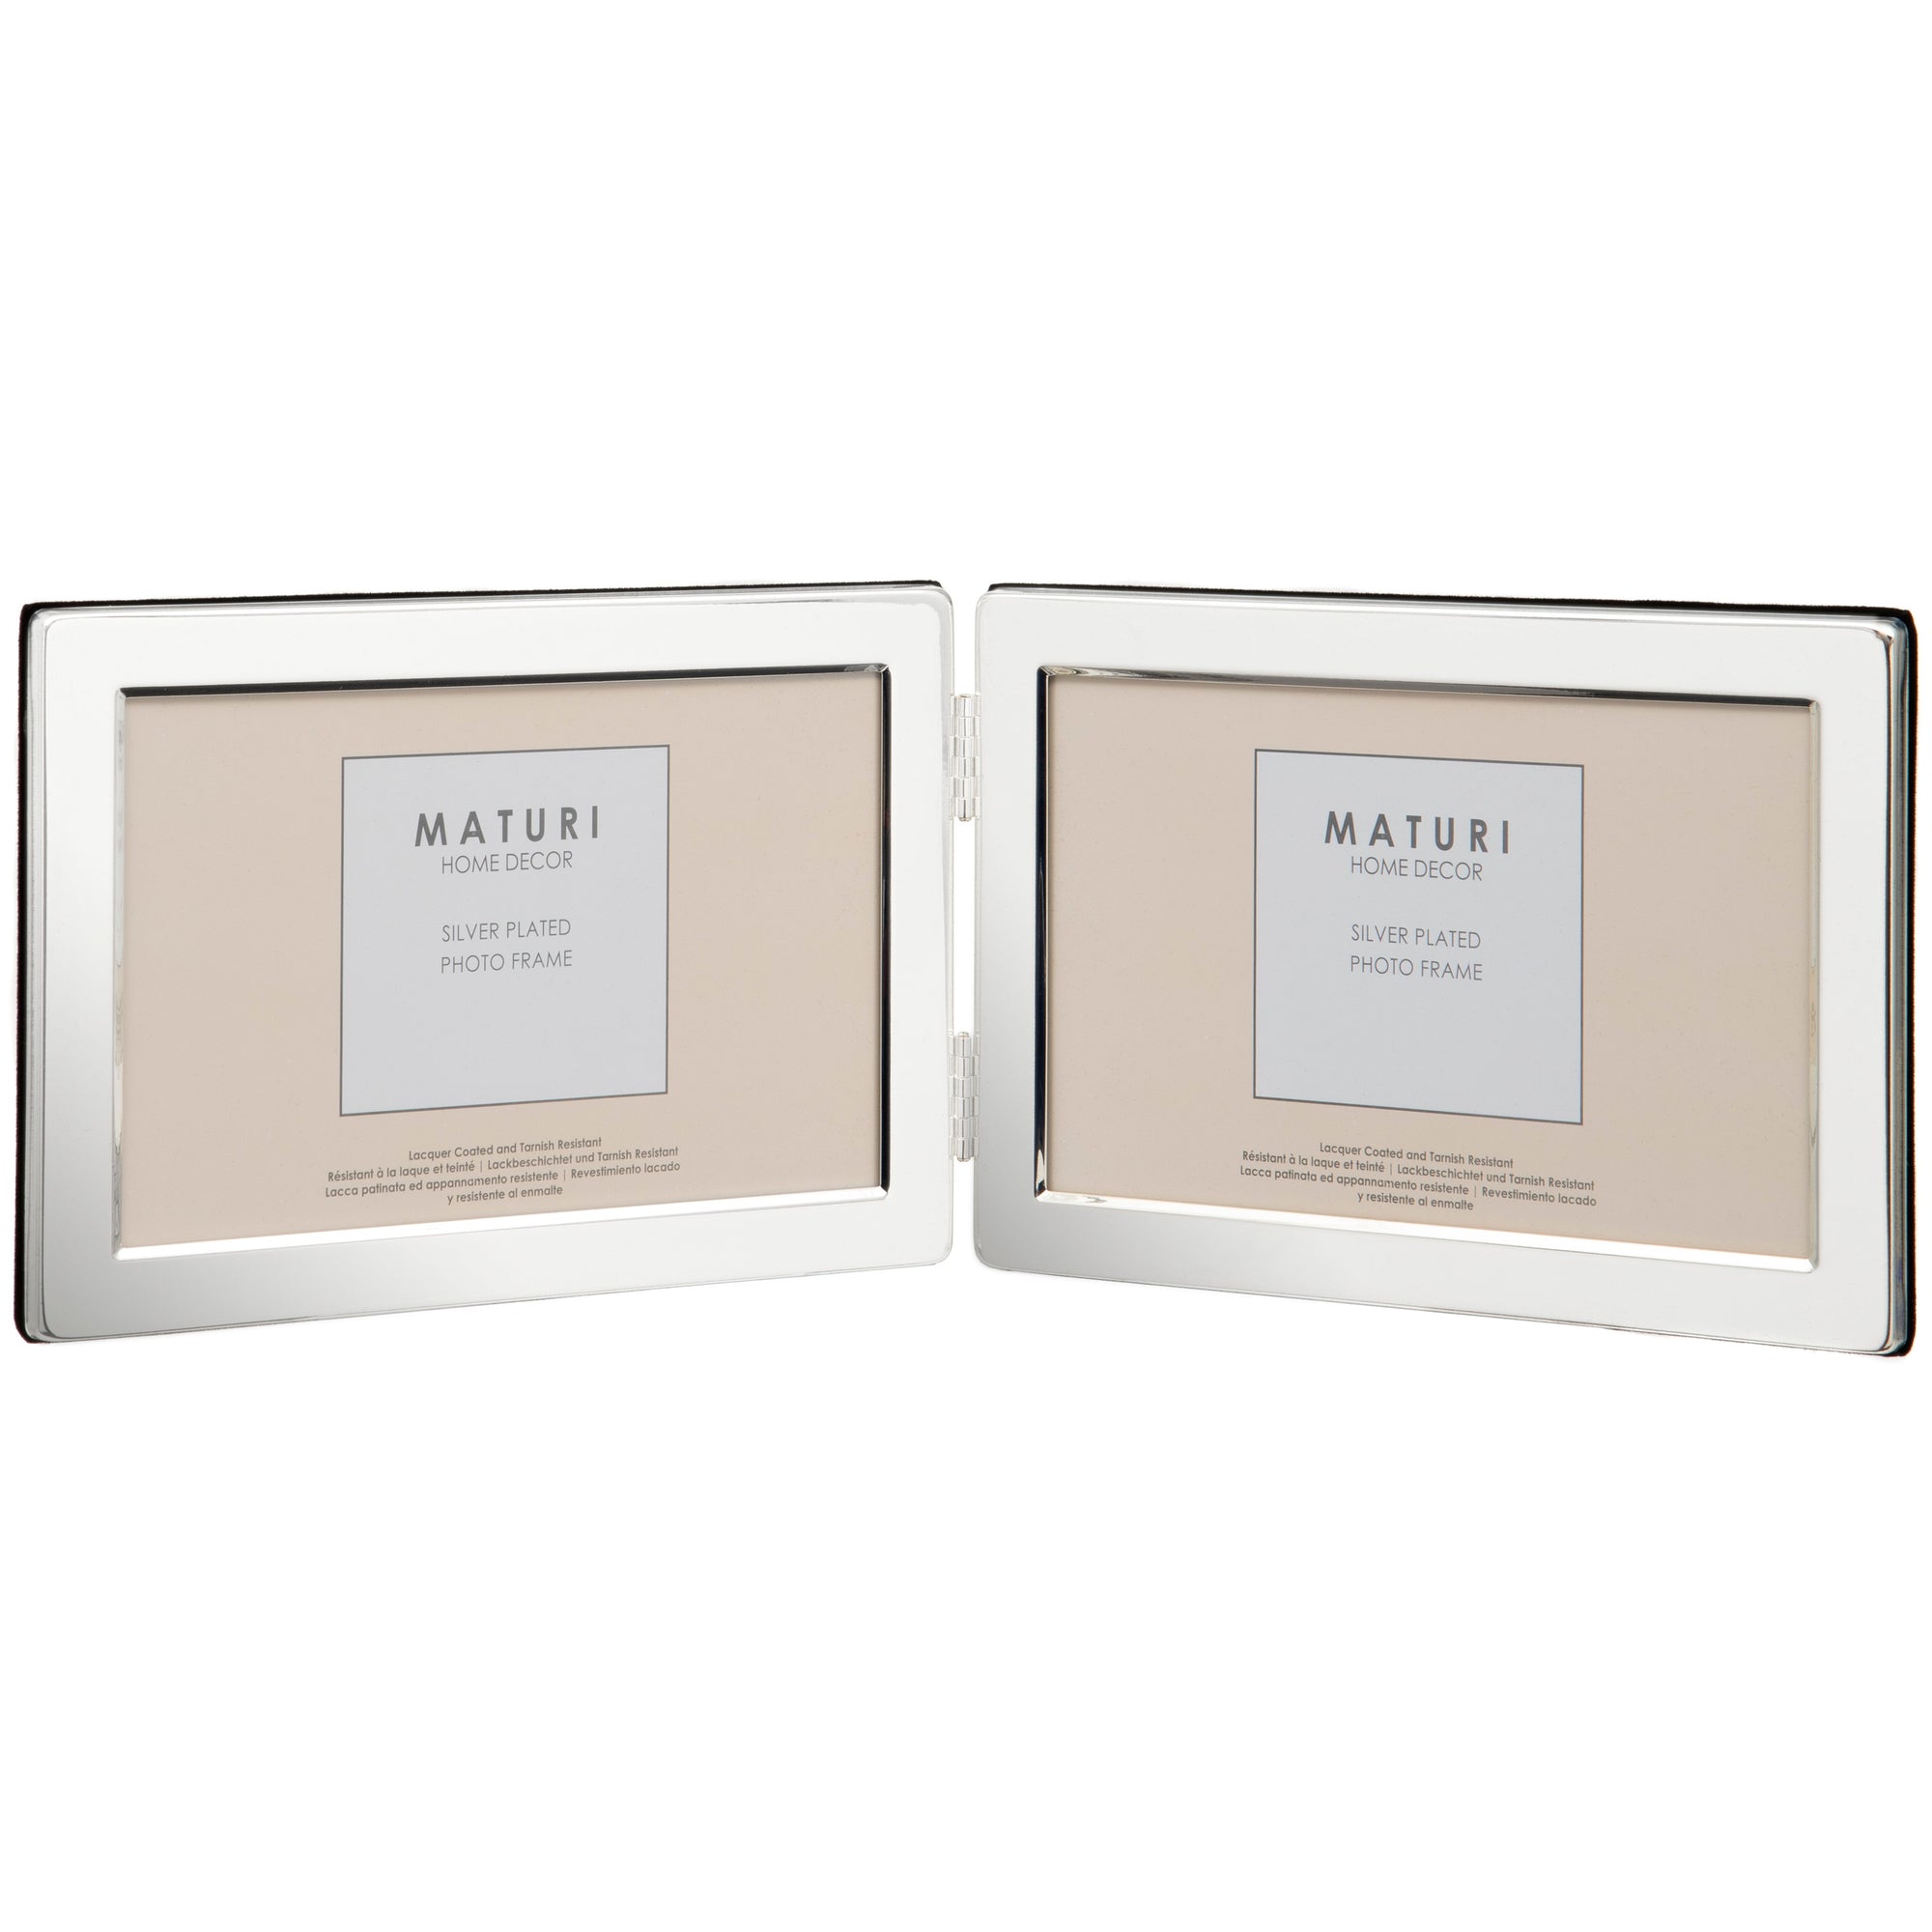 Silver Plated Landscape Photo Frame 7 x 5 -inch